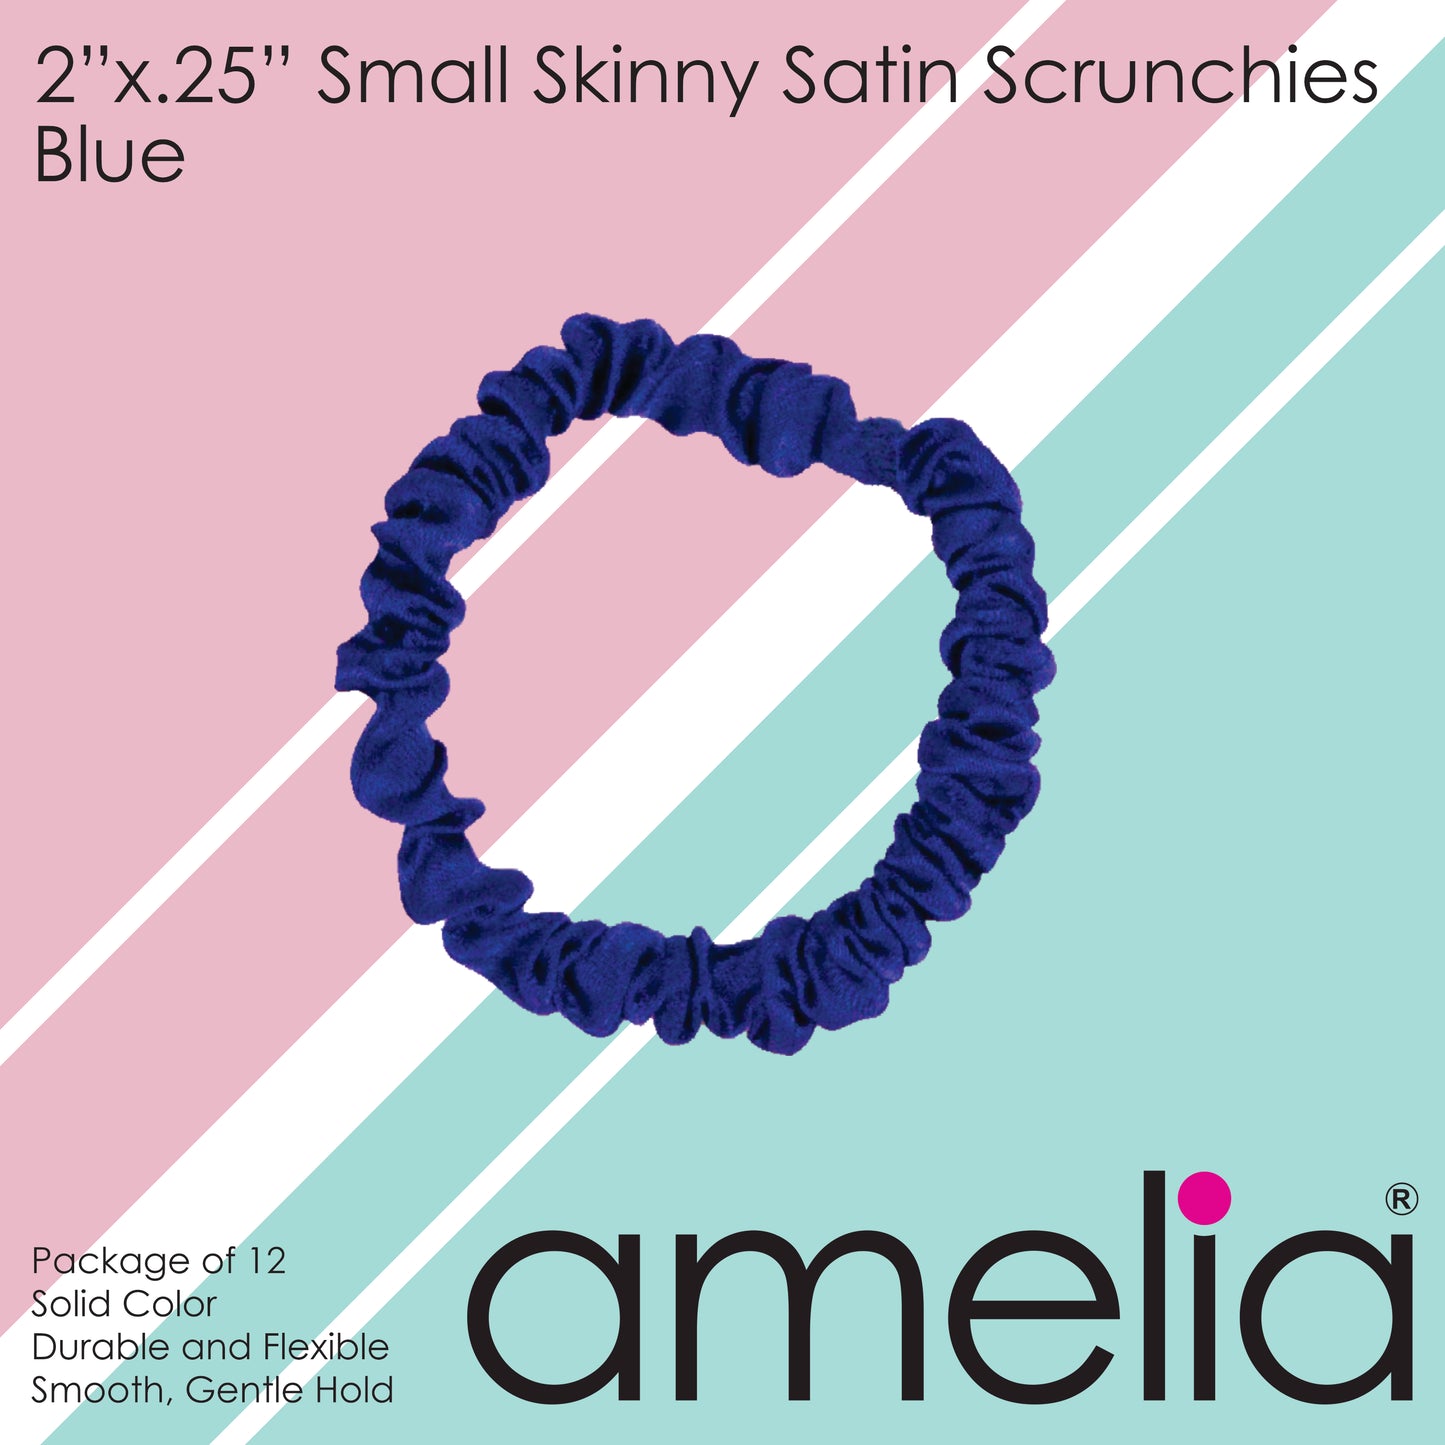 Amelia Beauty, Blue Skinny Satin Scrunchies, 2in Diameter, Gentle and Strong Hold, No Snag, No Dents or Creases. 12 Pack